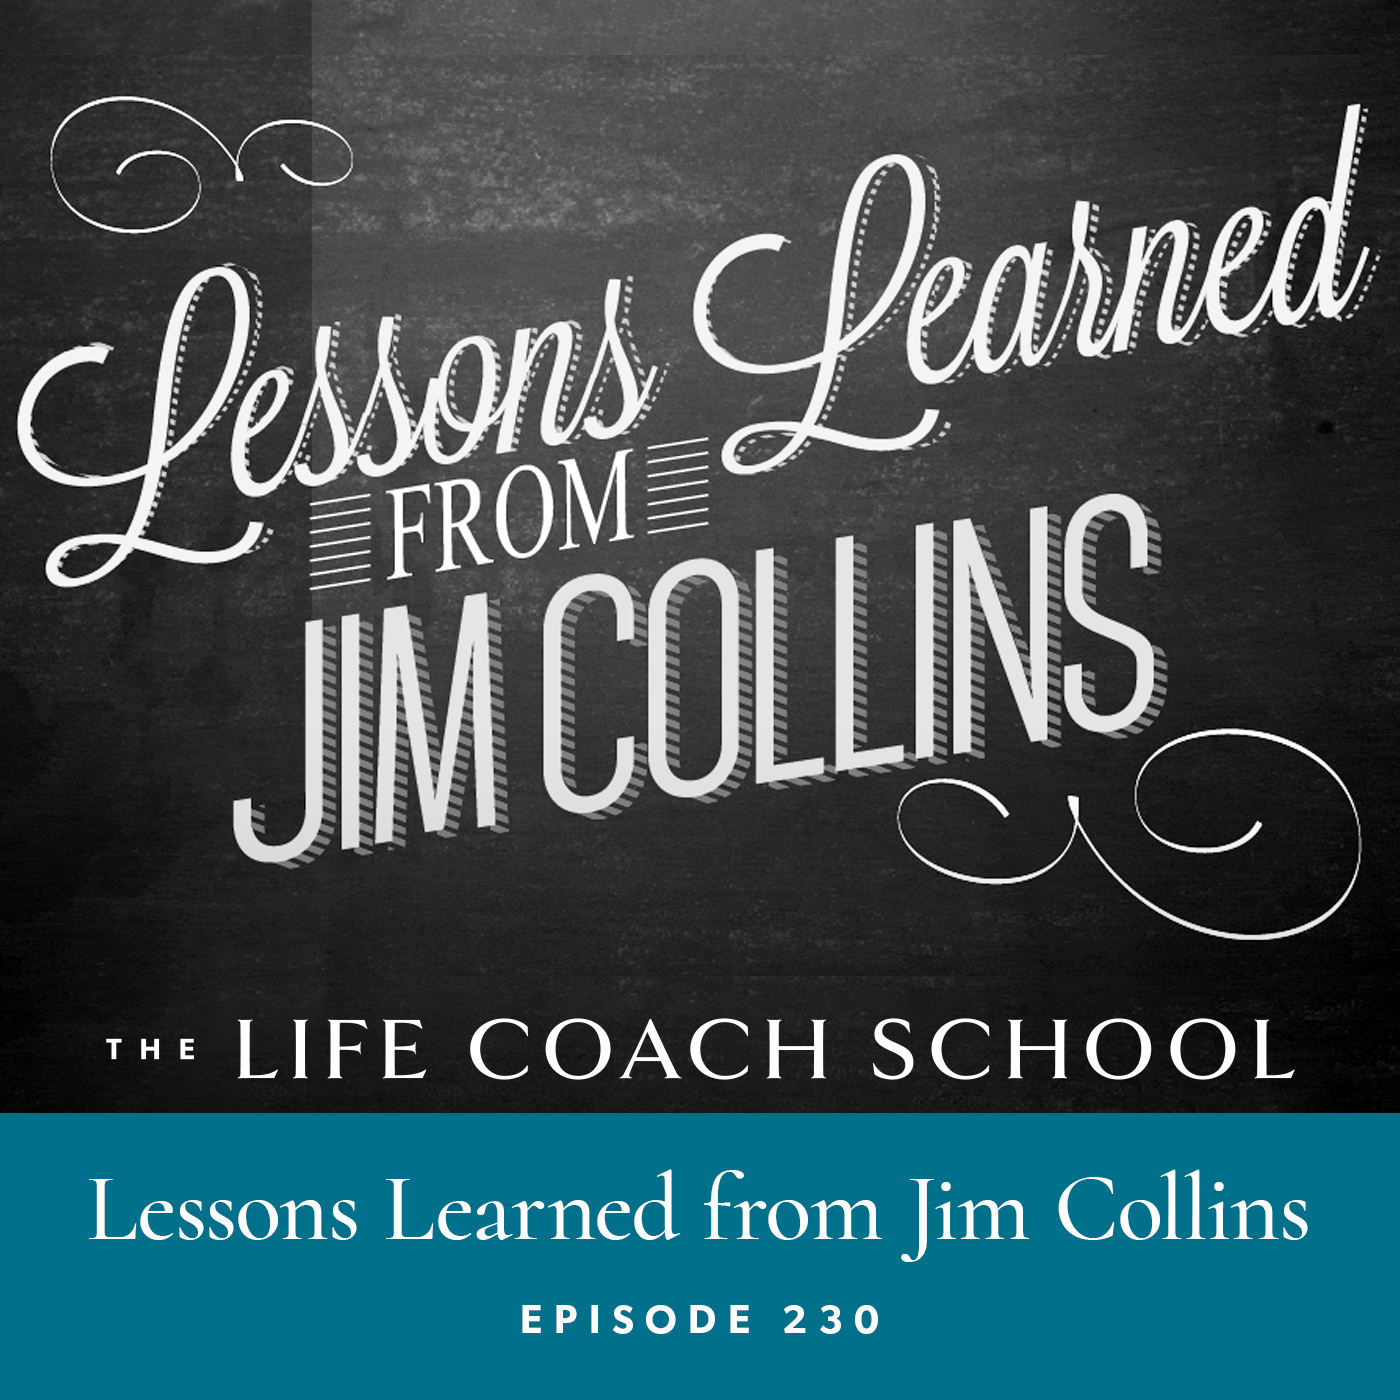 The Life Coach School Podcast with Brooke Castillo | Episode 230 | Lessons Learned from Jim Collins